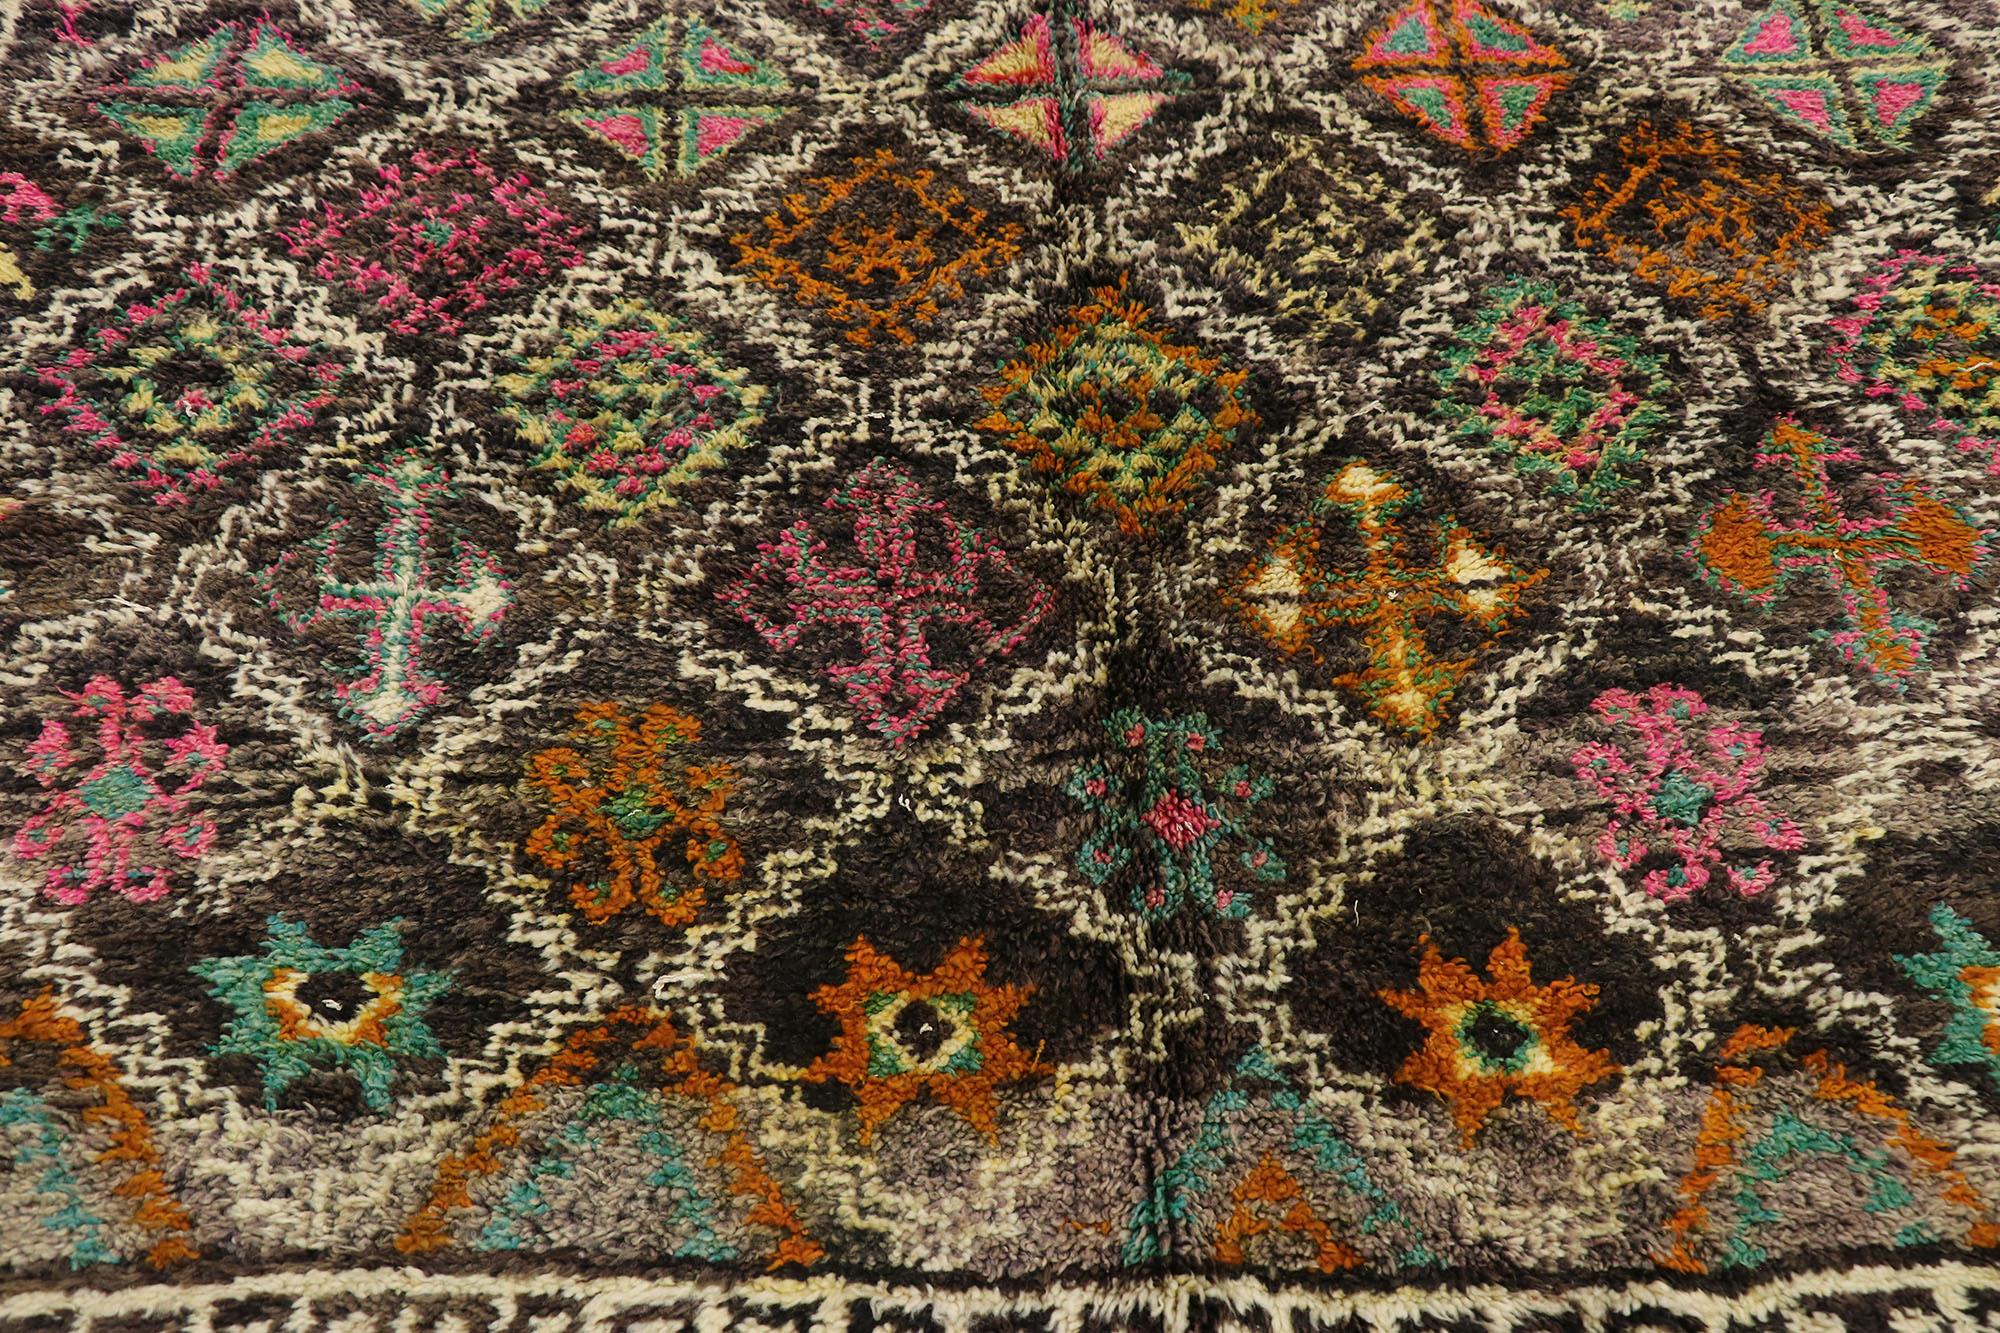 Vintage Berber Boujad Moroccan Rug with Tribal Boho Chic Style In Good Condition For Sale In Dallas, TX